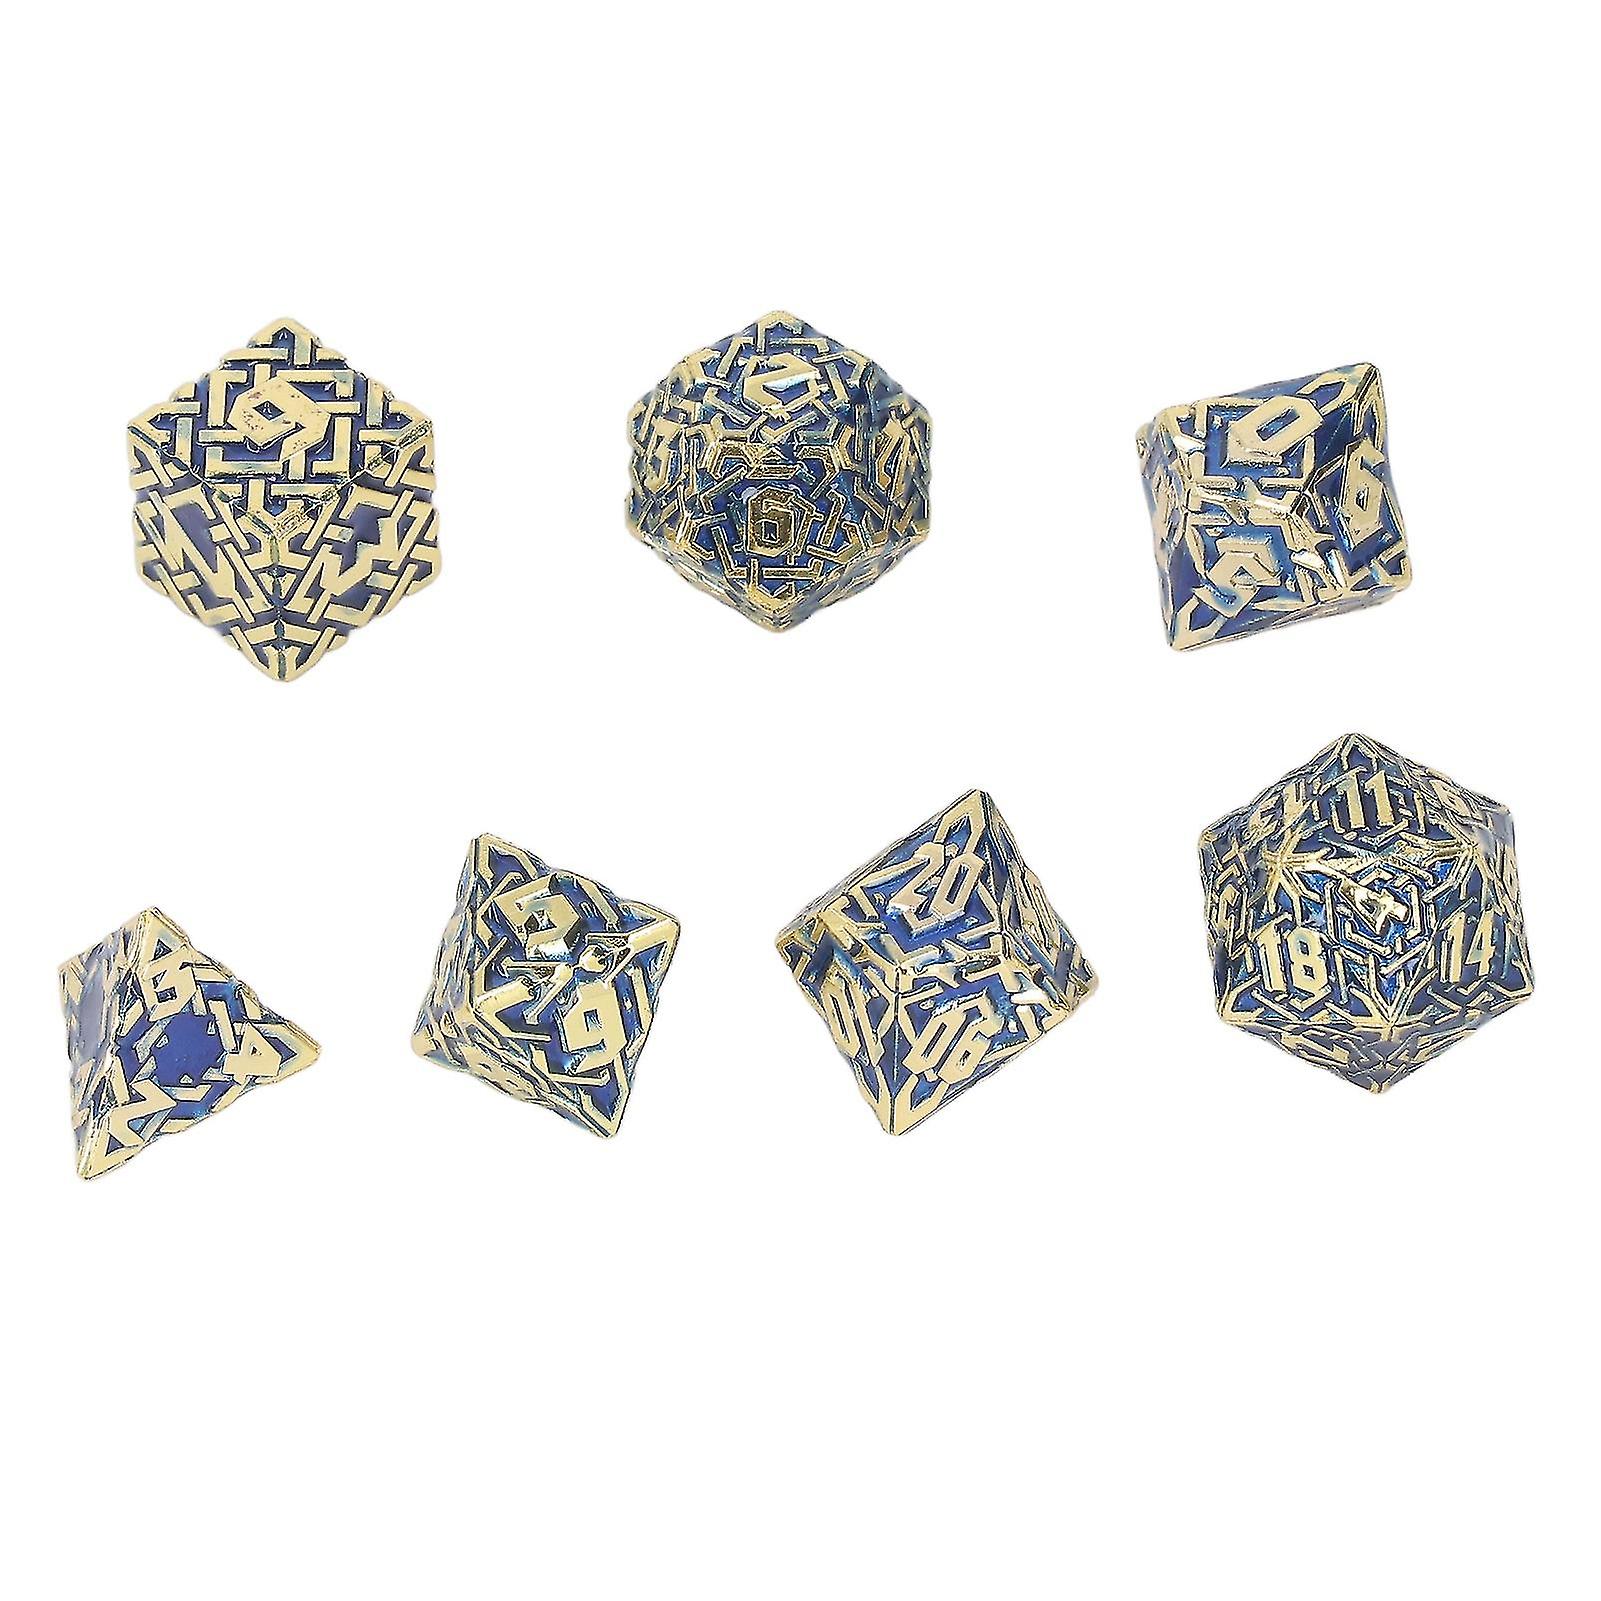 7pcs Metal Polyhedral Dice Maze Pattern Engraved nced Rolling Solid Metal Dice for Games Role Play Style 1